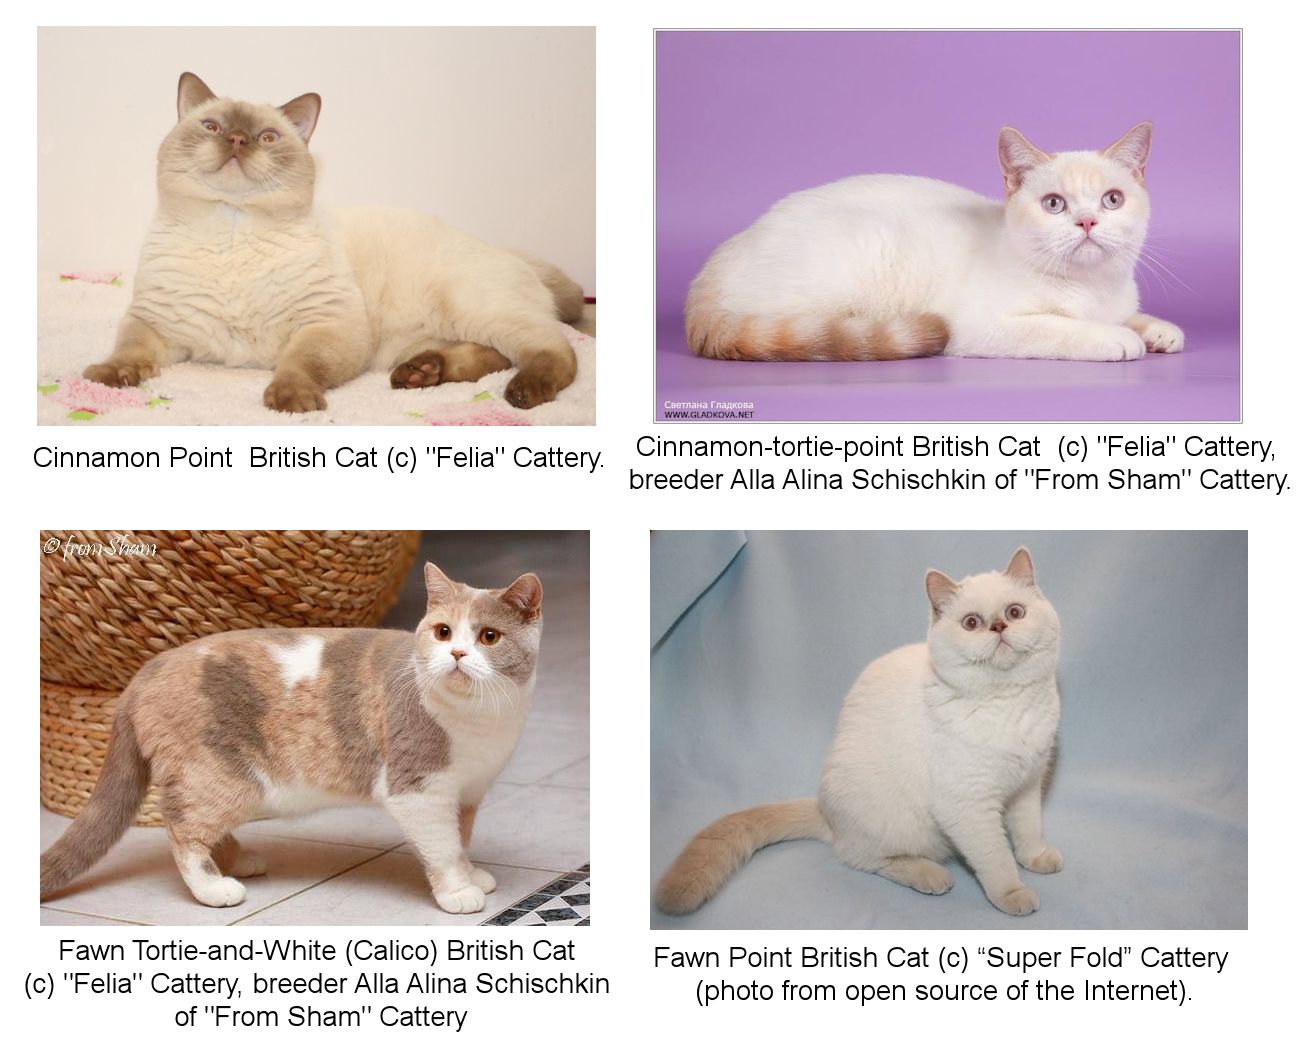 cinnamon point and fawn point British Shorthair cats, Russia